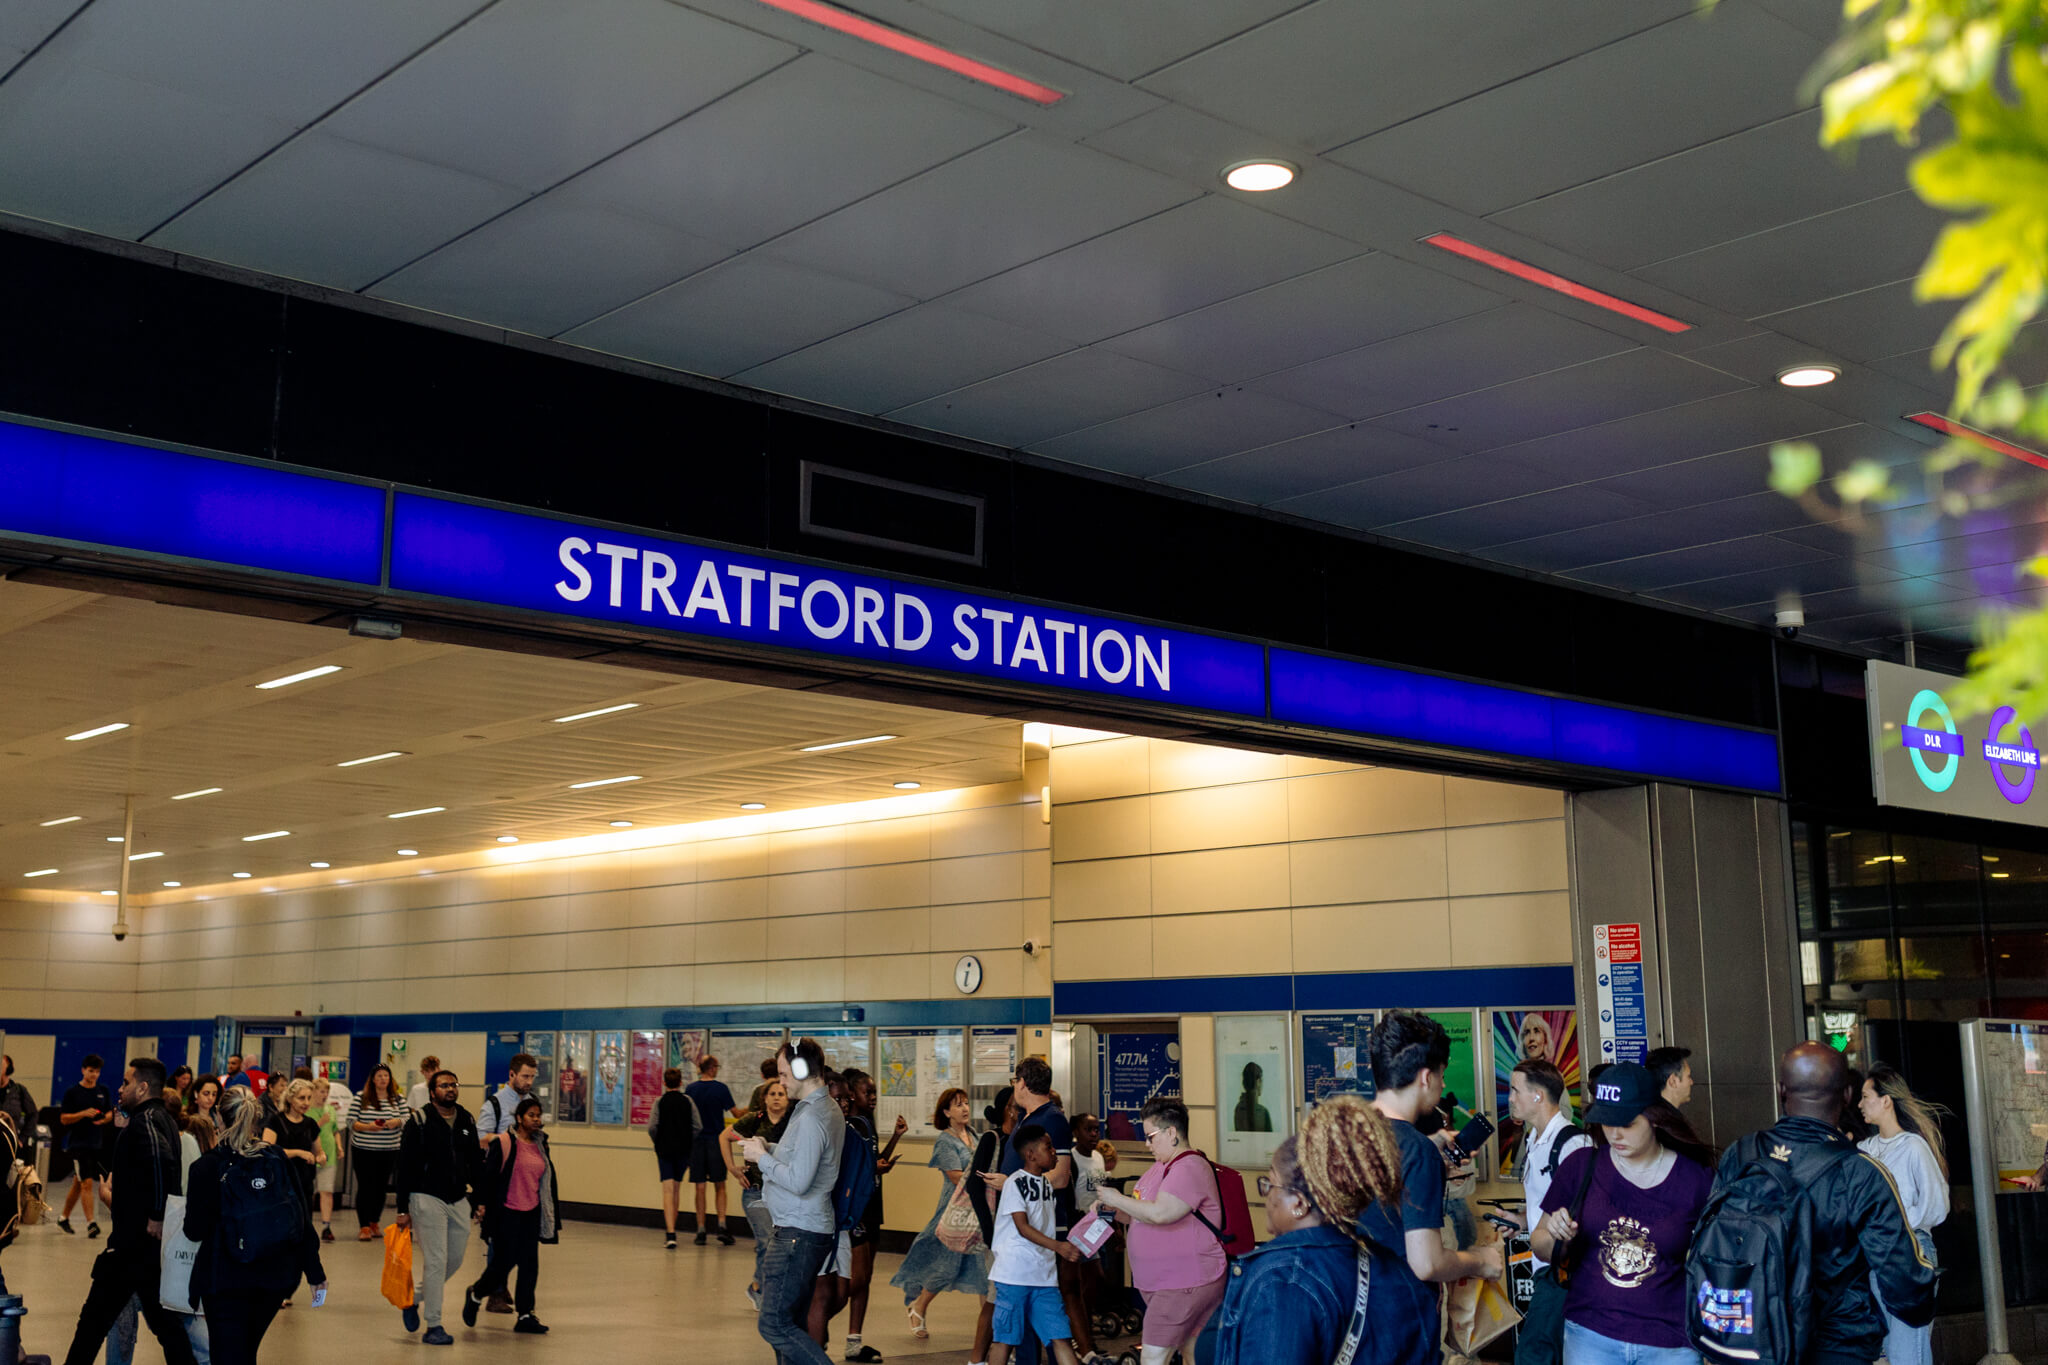 Stratford Cross station with a crowd entering.